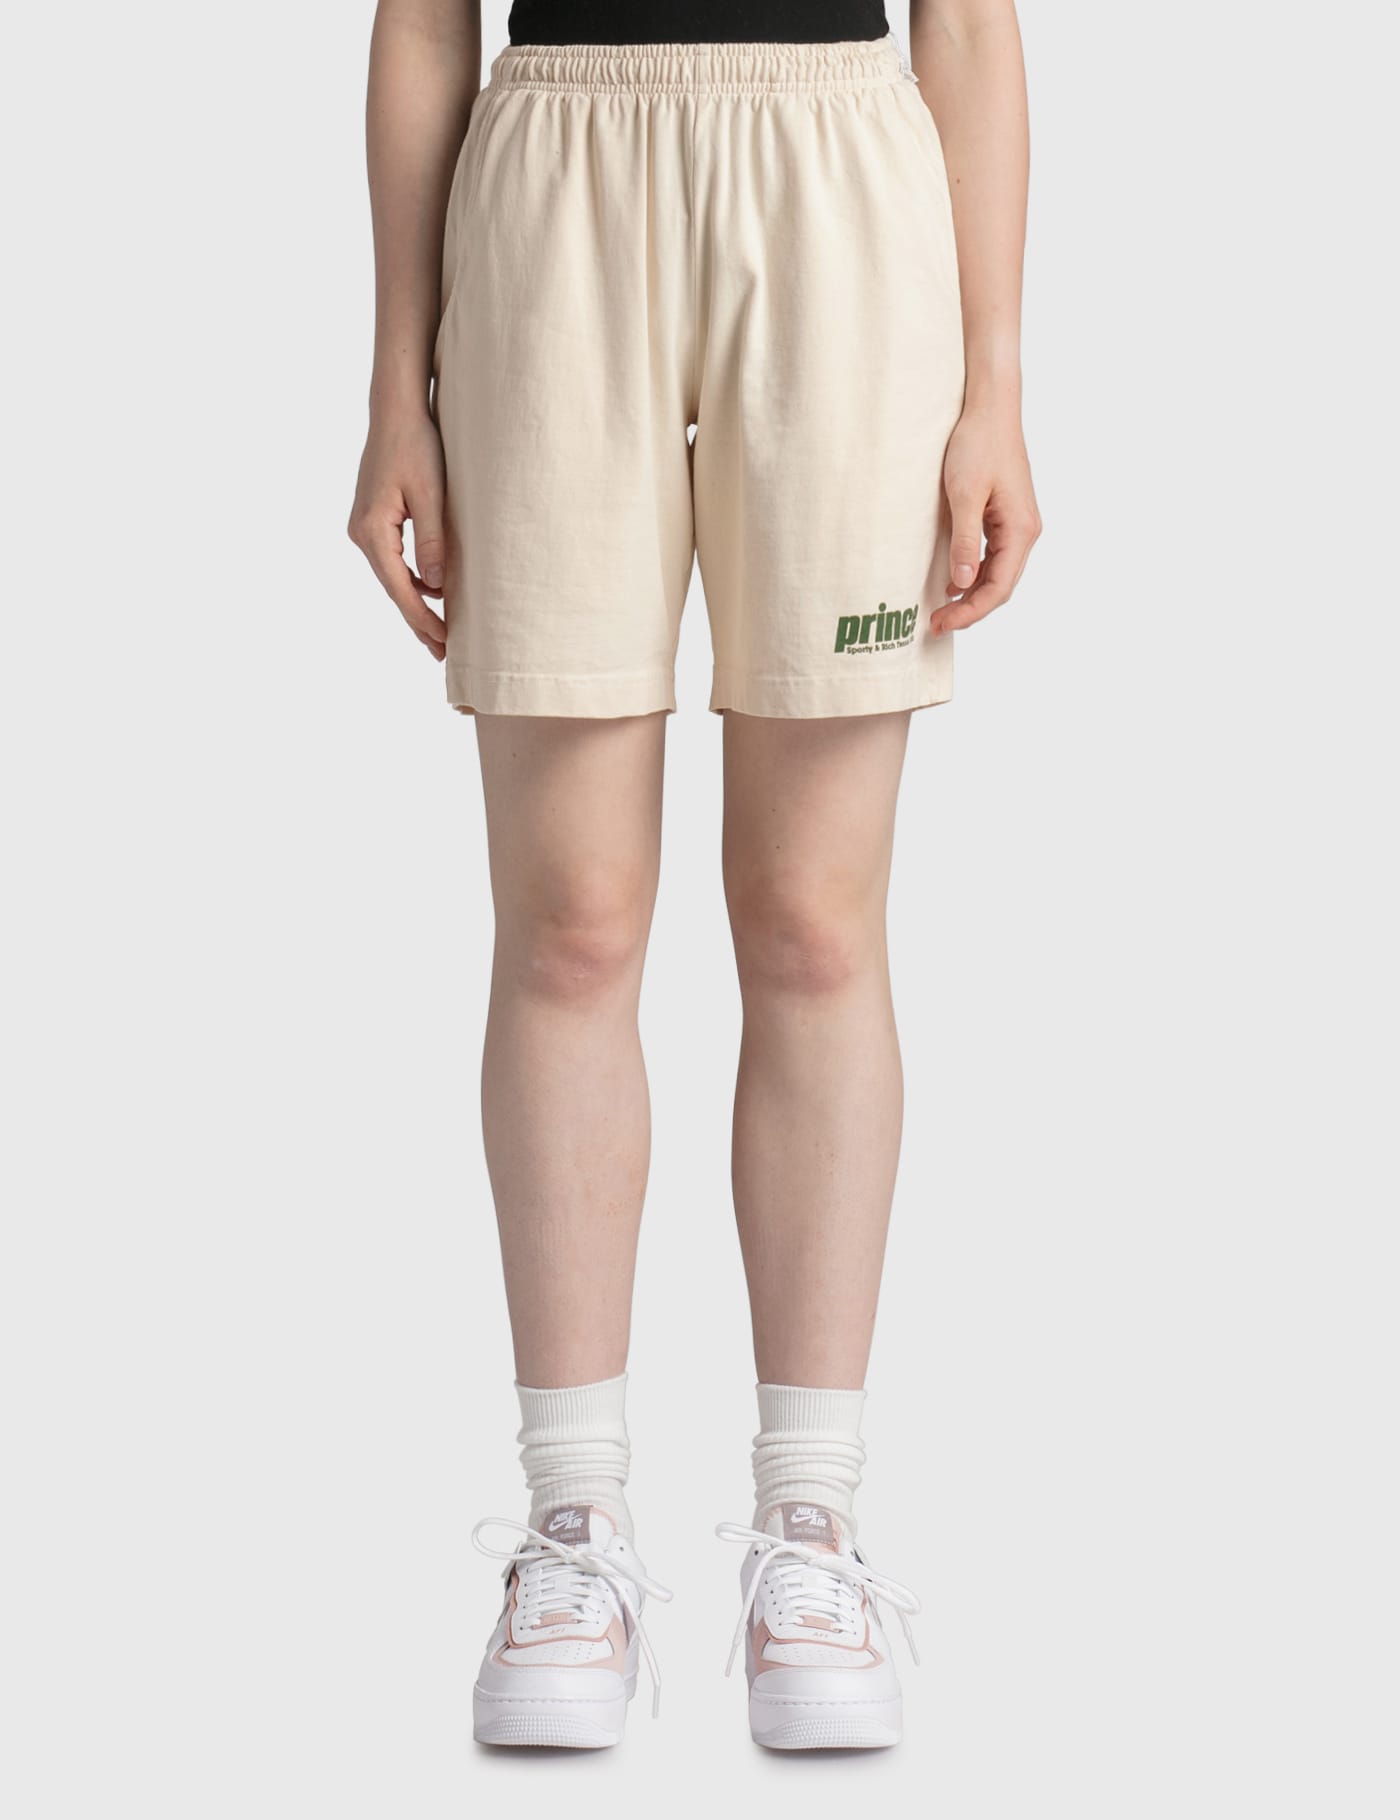 Sporty & Rich Prince High Waist Gym Shorts in Beige/Green Womens Shorts Sporty & Rich Shorts White 